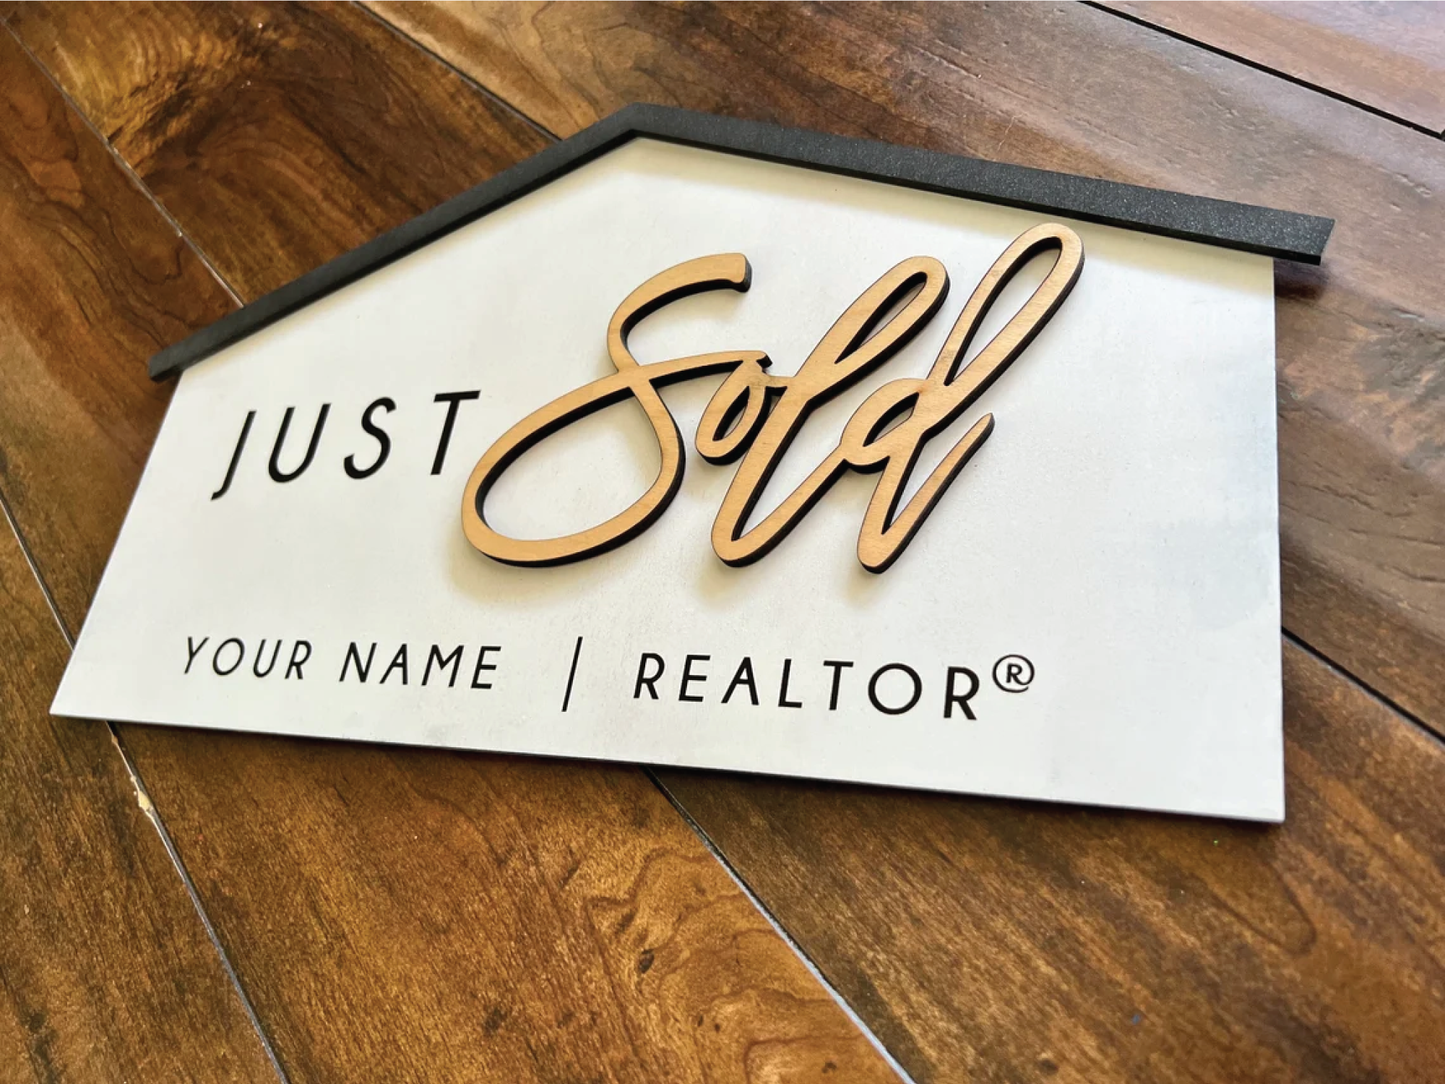 Real estate closing sign - Just sold sign